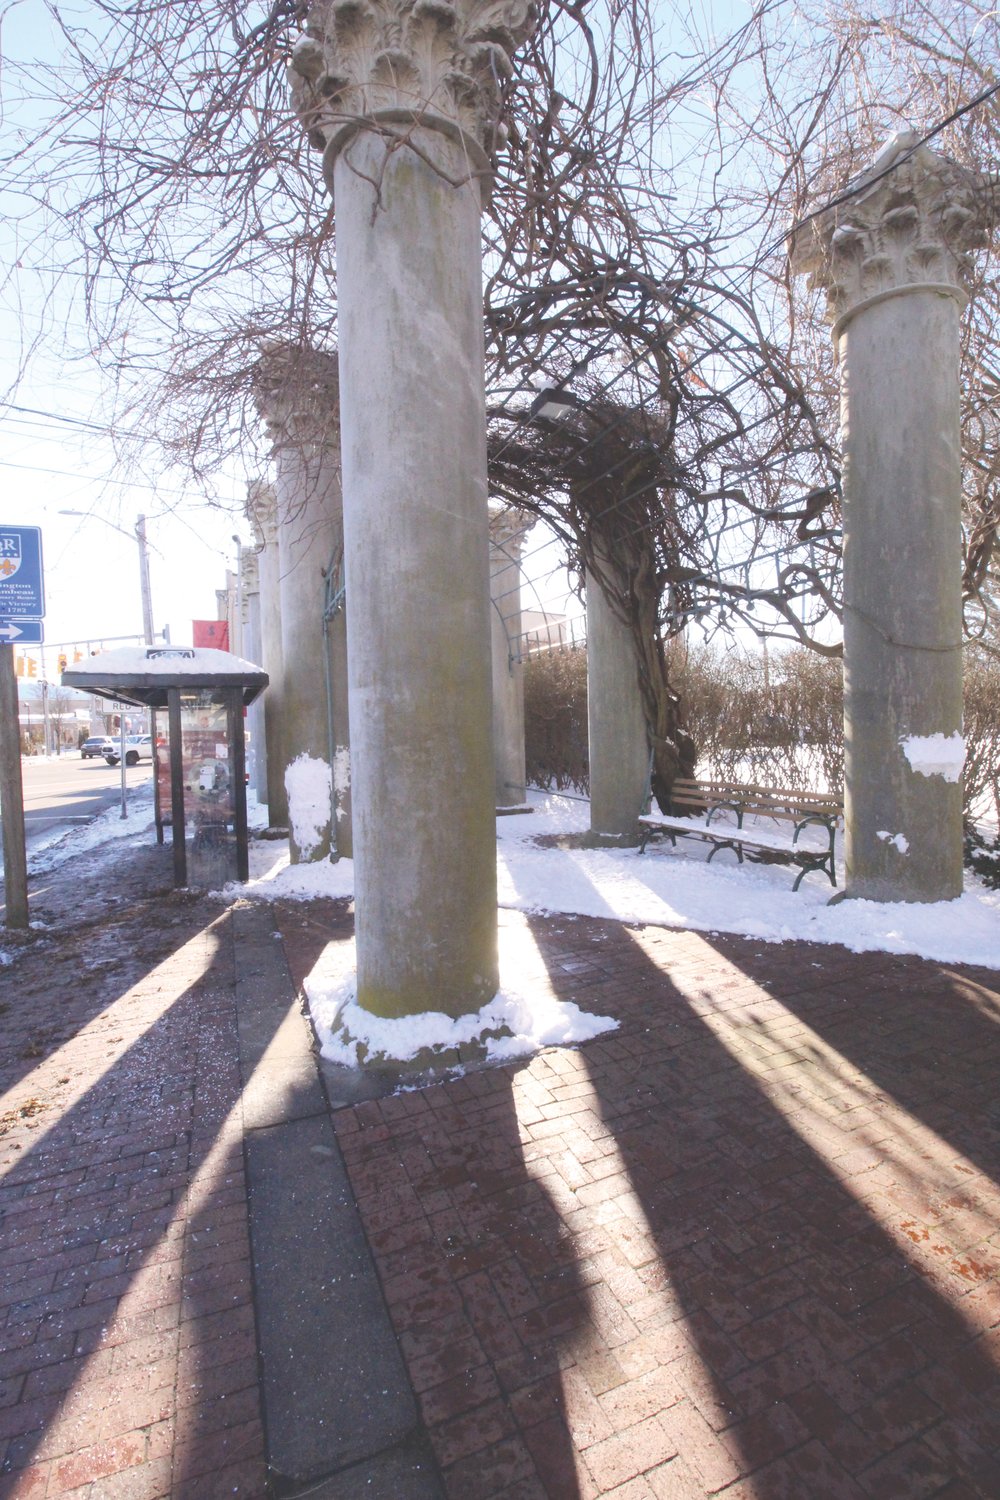 COLUMNS THAT TRANSPORT YOU: Knighsville’s columns mirror the Italian vibe that the town is looking for. In order to make the area look more like Itri, Italy, the City will imitate its lighting and sidewalks.